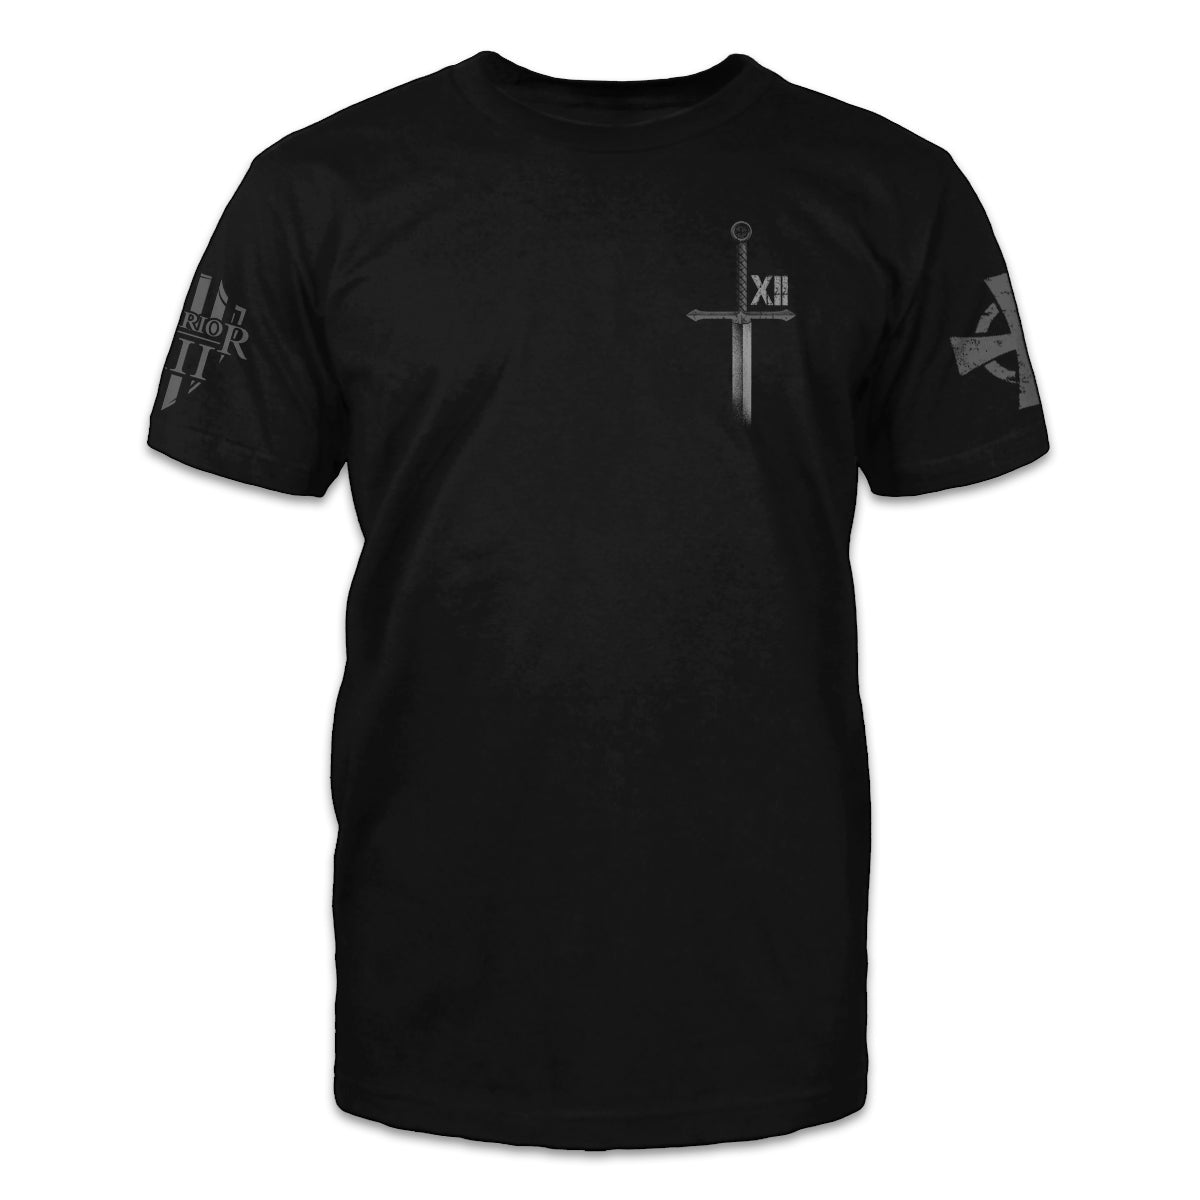 A black t-shrit with a sword printed on the front of the shirt.